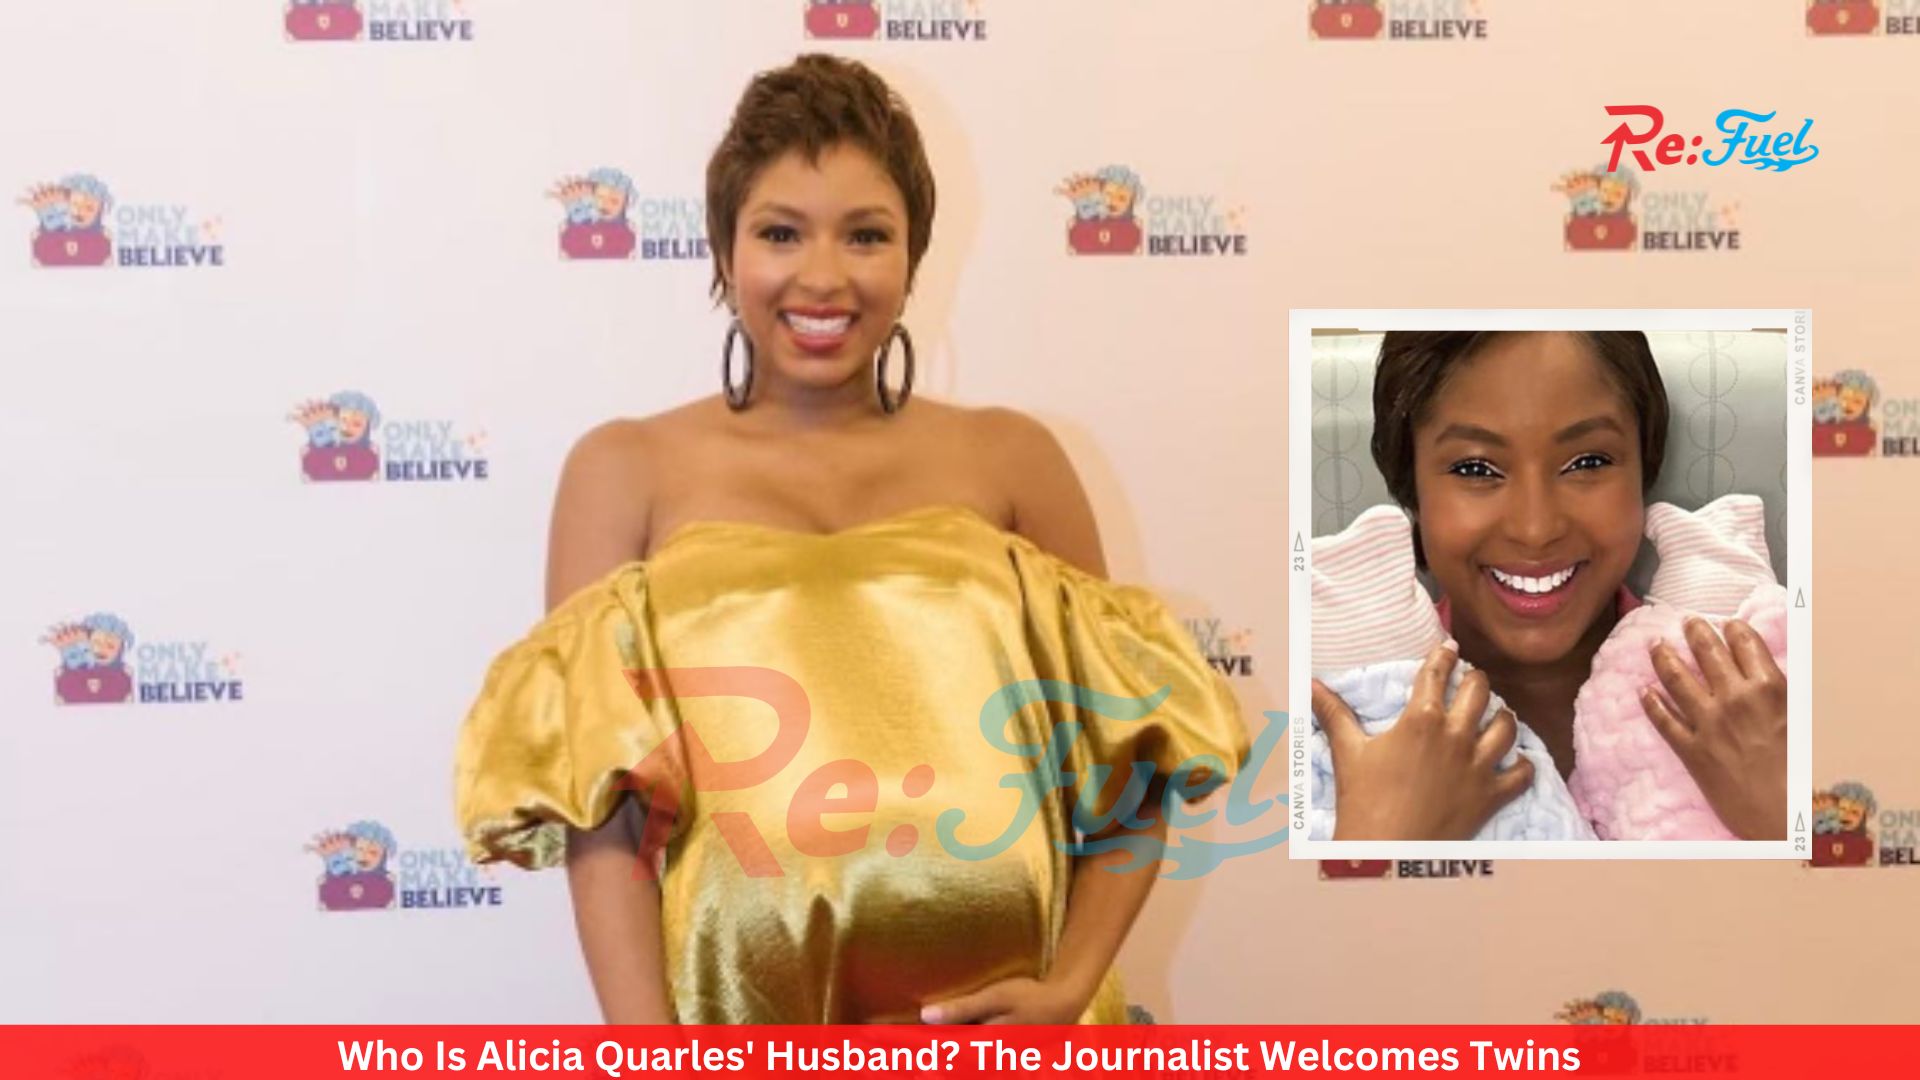 Who Is Alicia Quarles' Husband? The Journalist Welcomes Twins